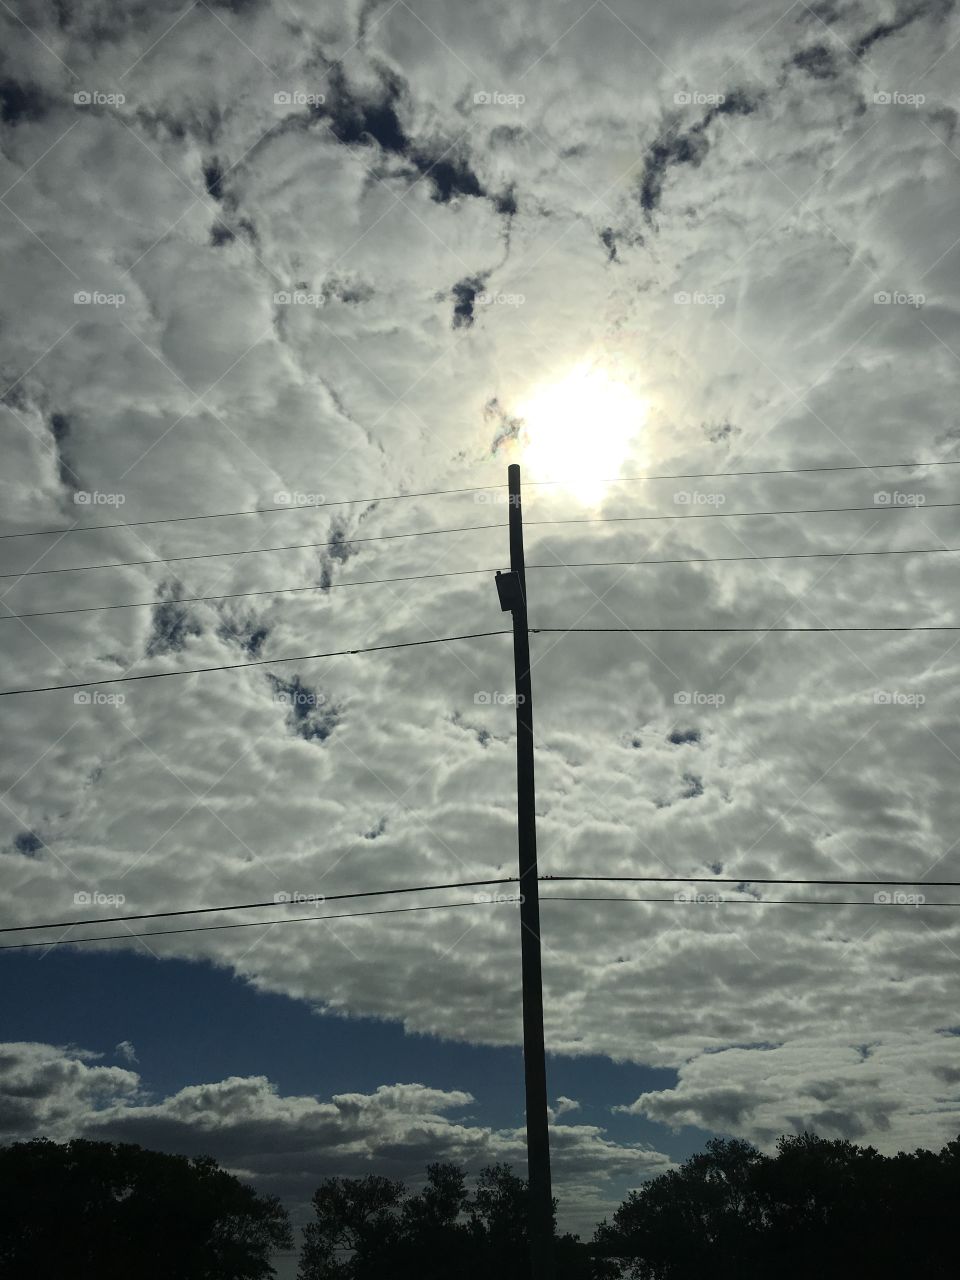 clouds and power lines 